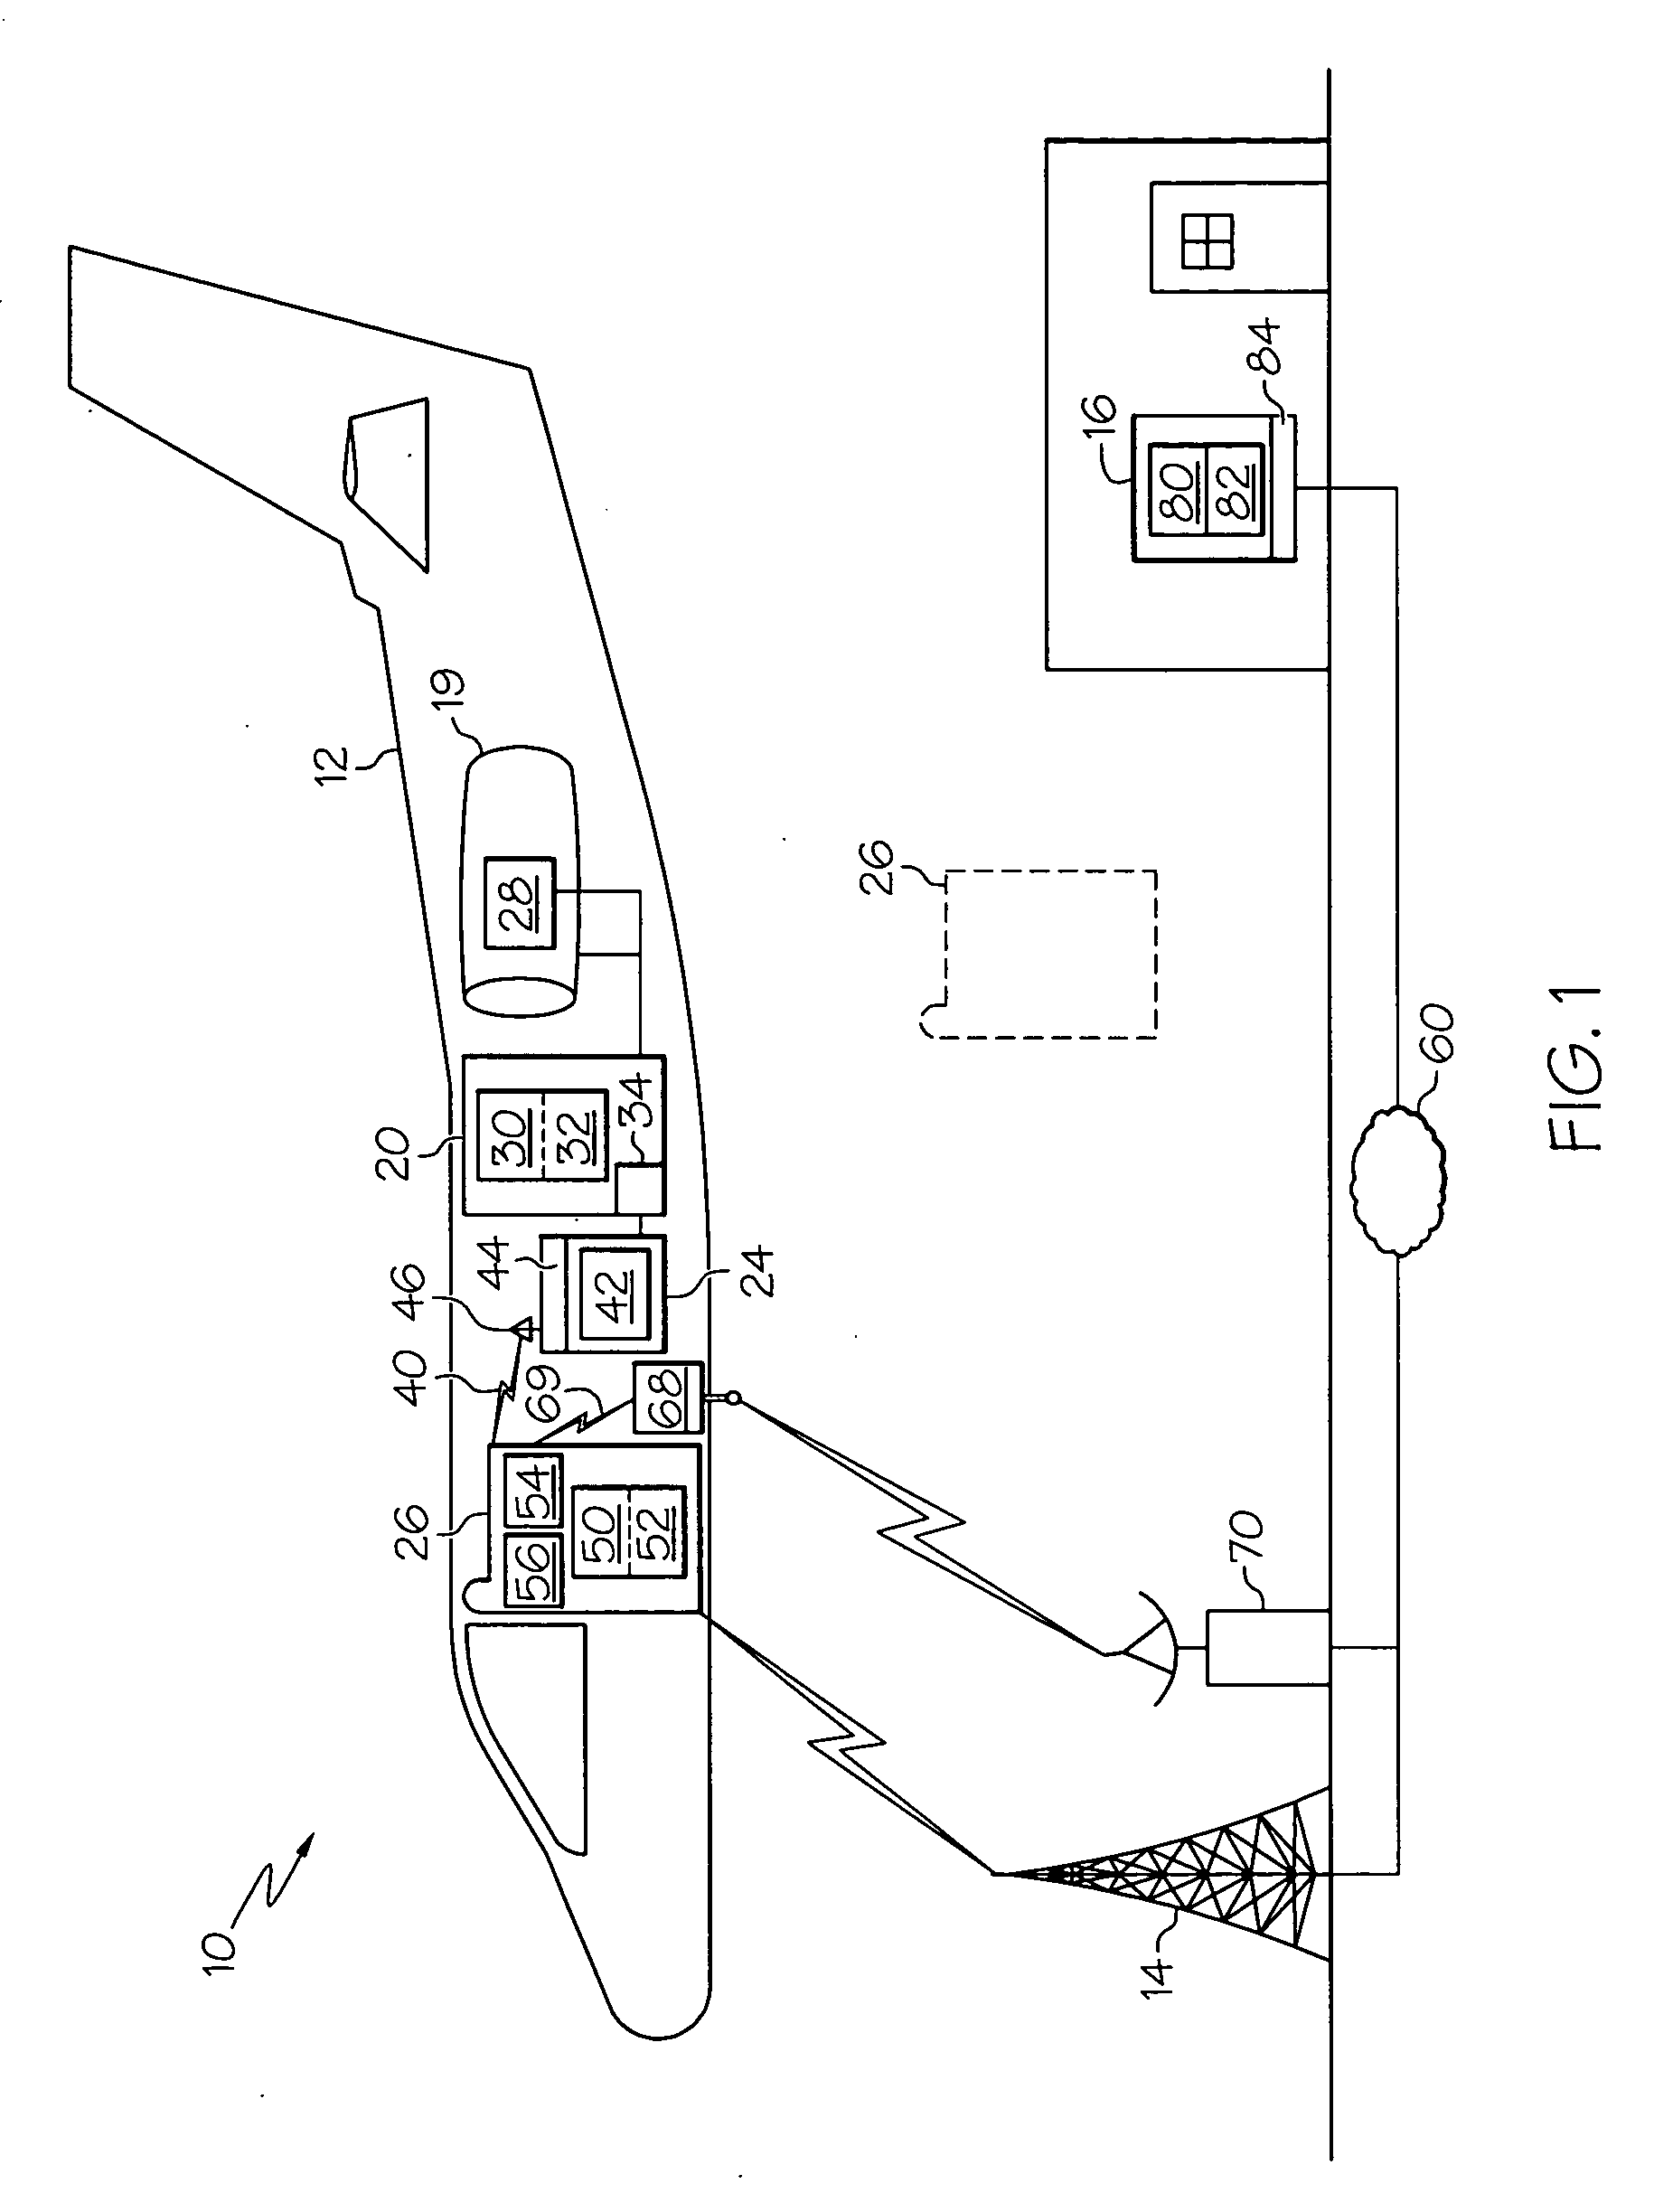 System and method for acquiring  data from an aircraft